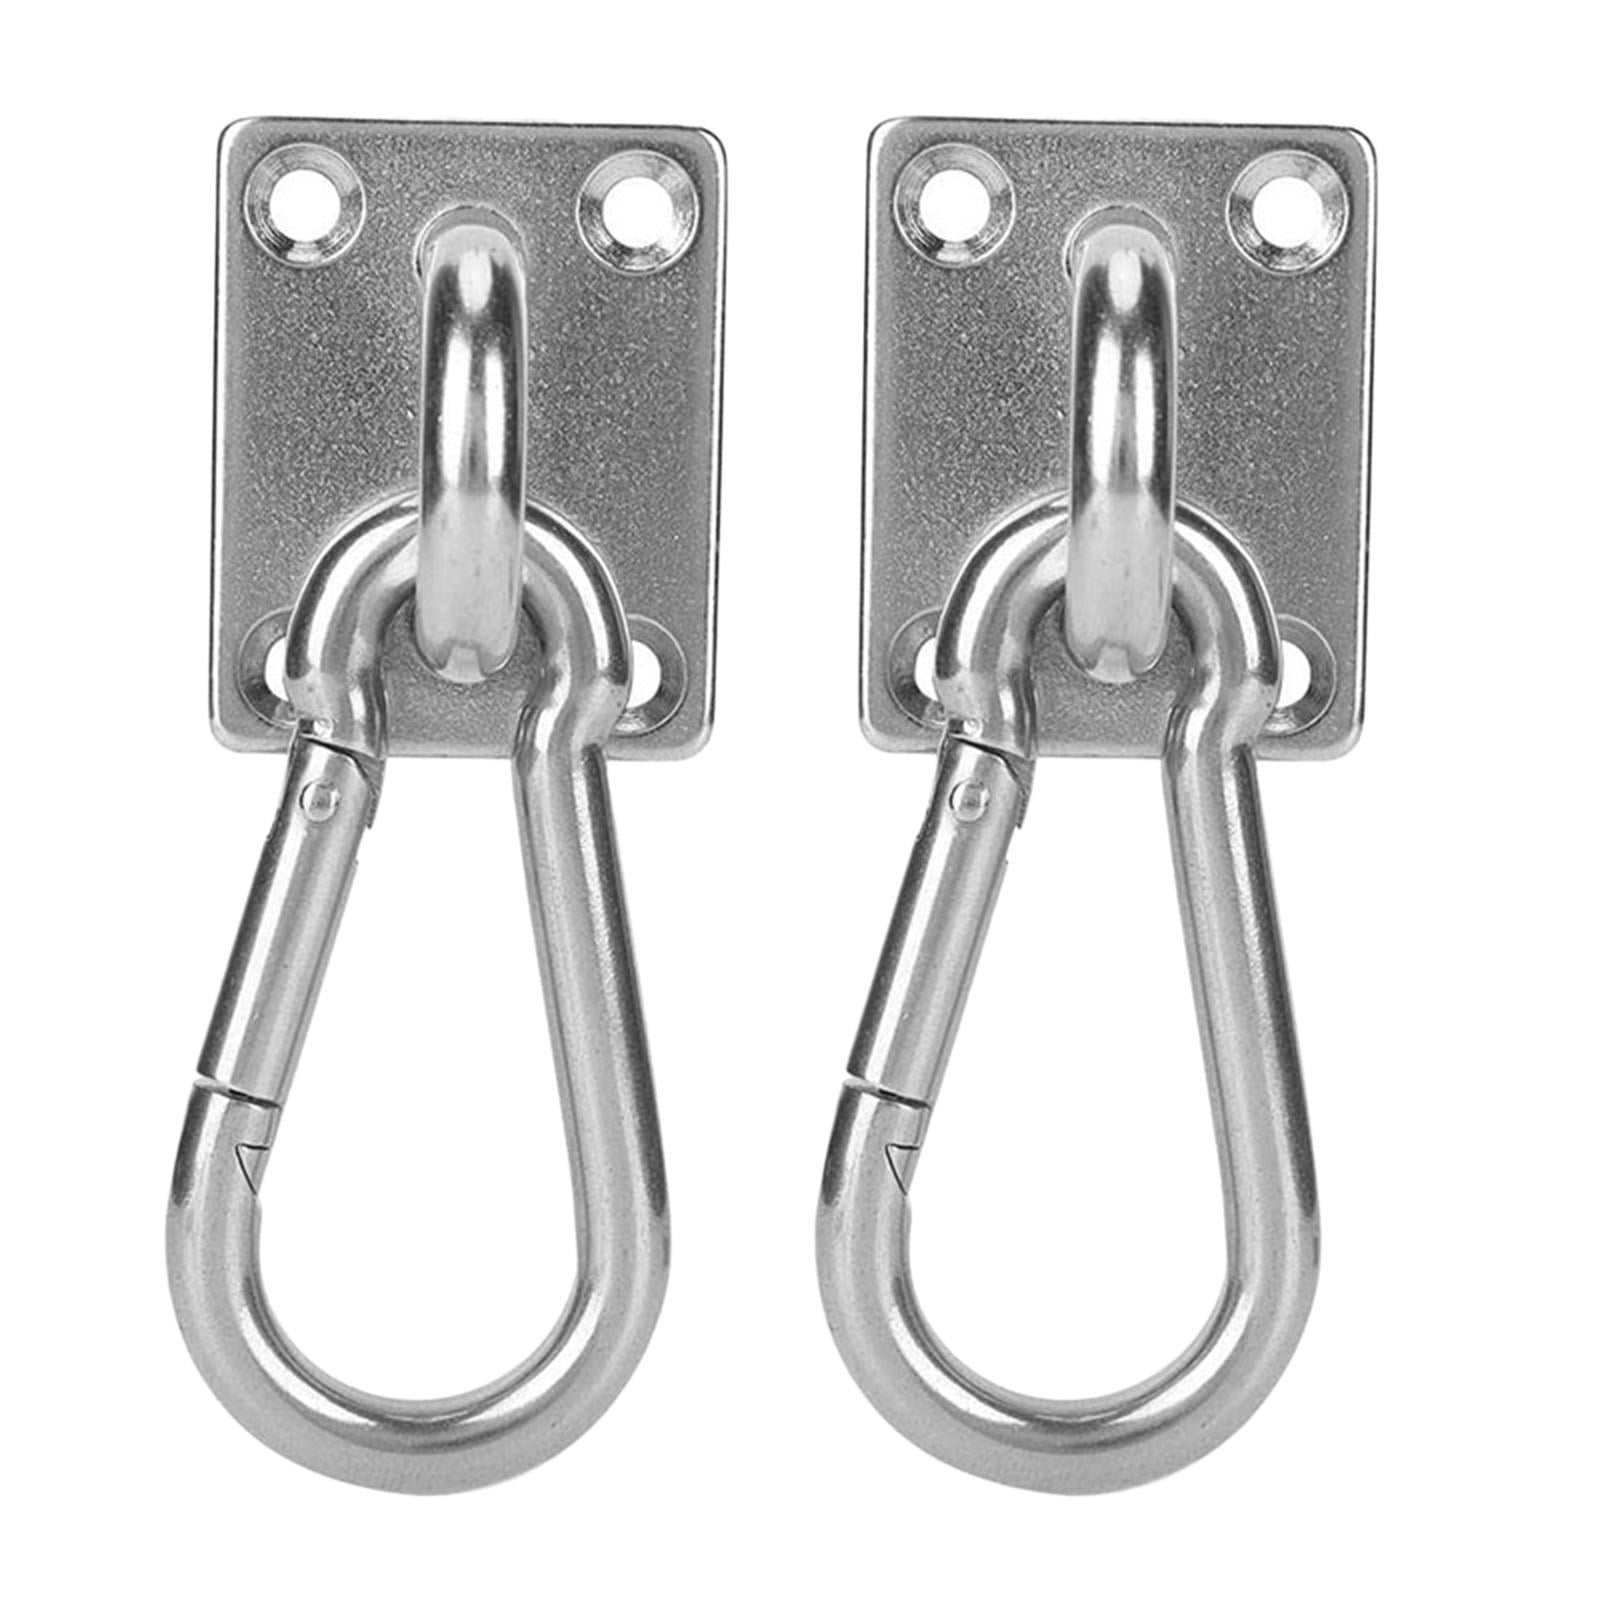 Details about   Ceiling Anchor Pad Eye Plate Battle Rope Hanging Hook Carabiner Screws Bolts 